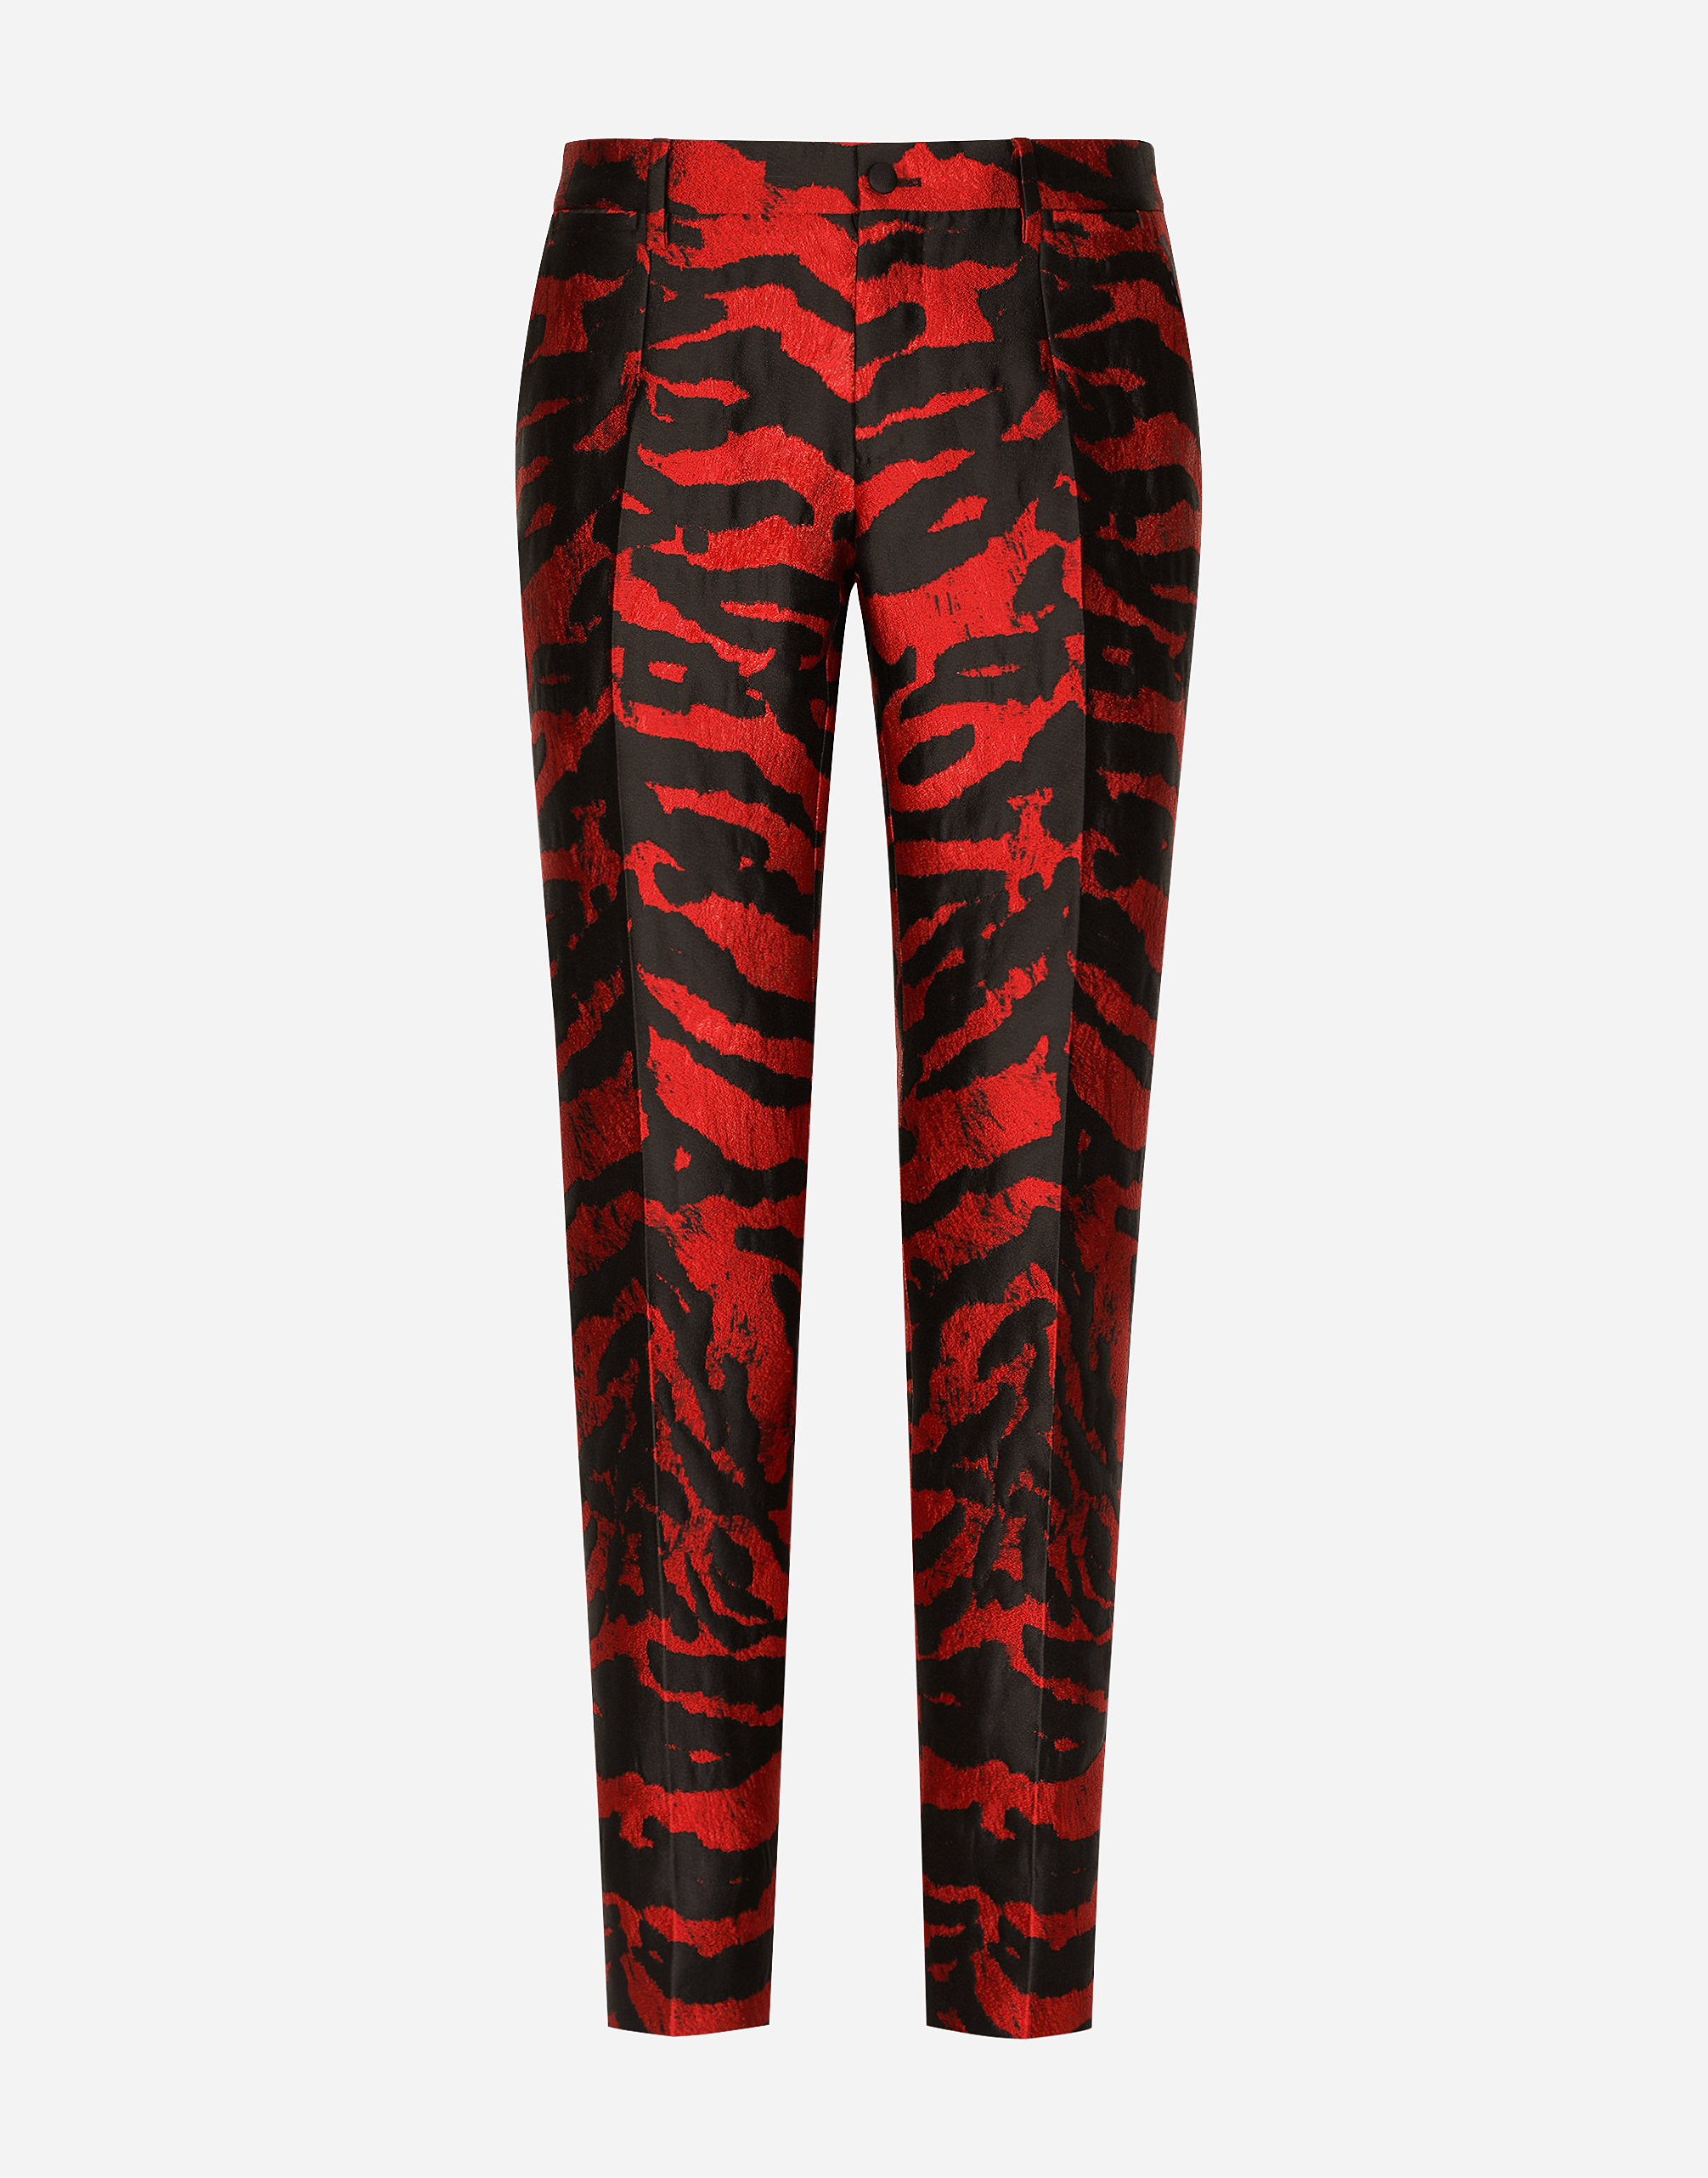 Lamé jacquard pants with tiger design in Multicolor